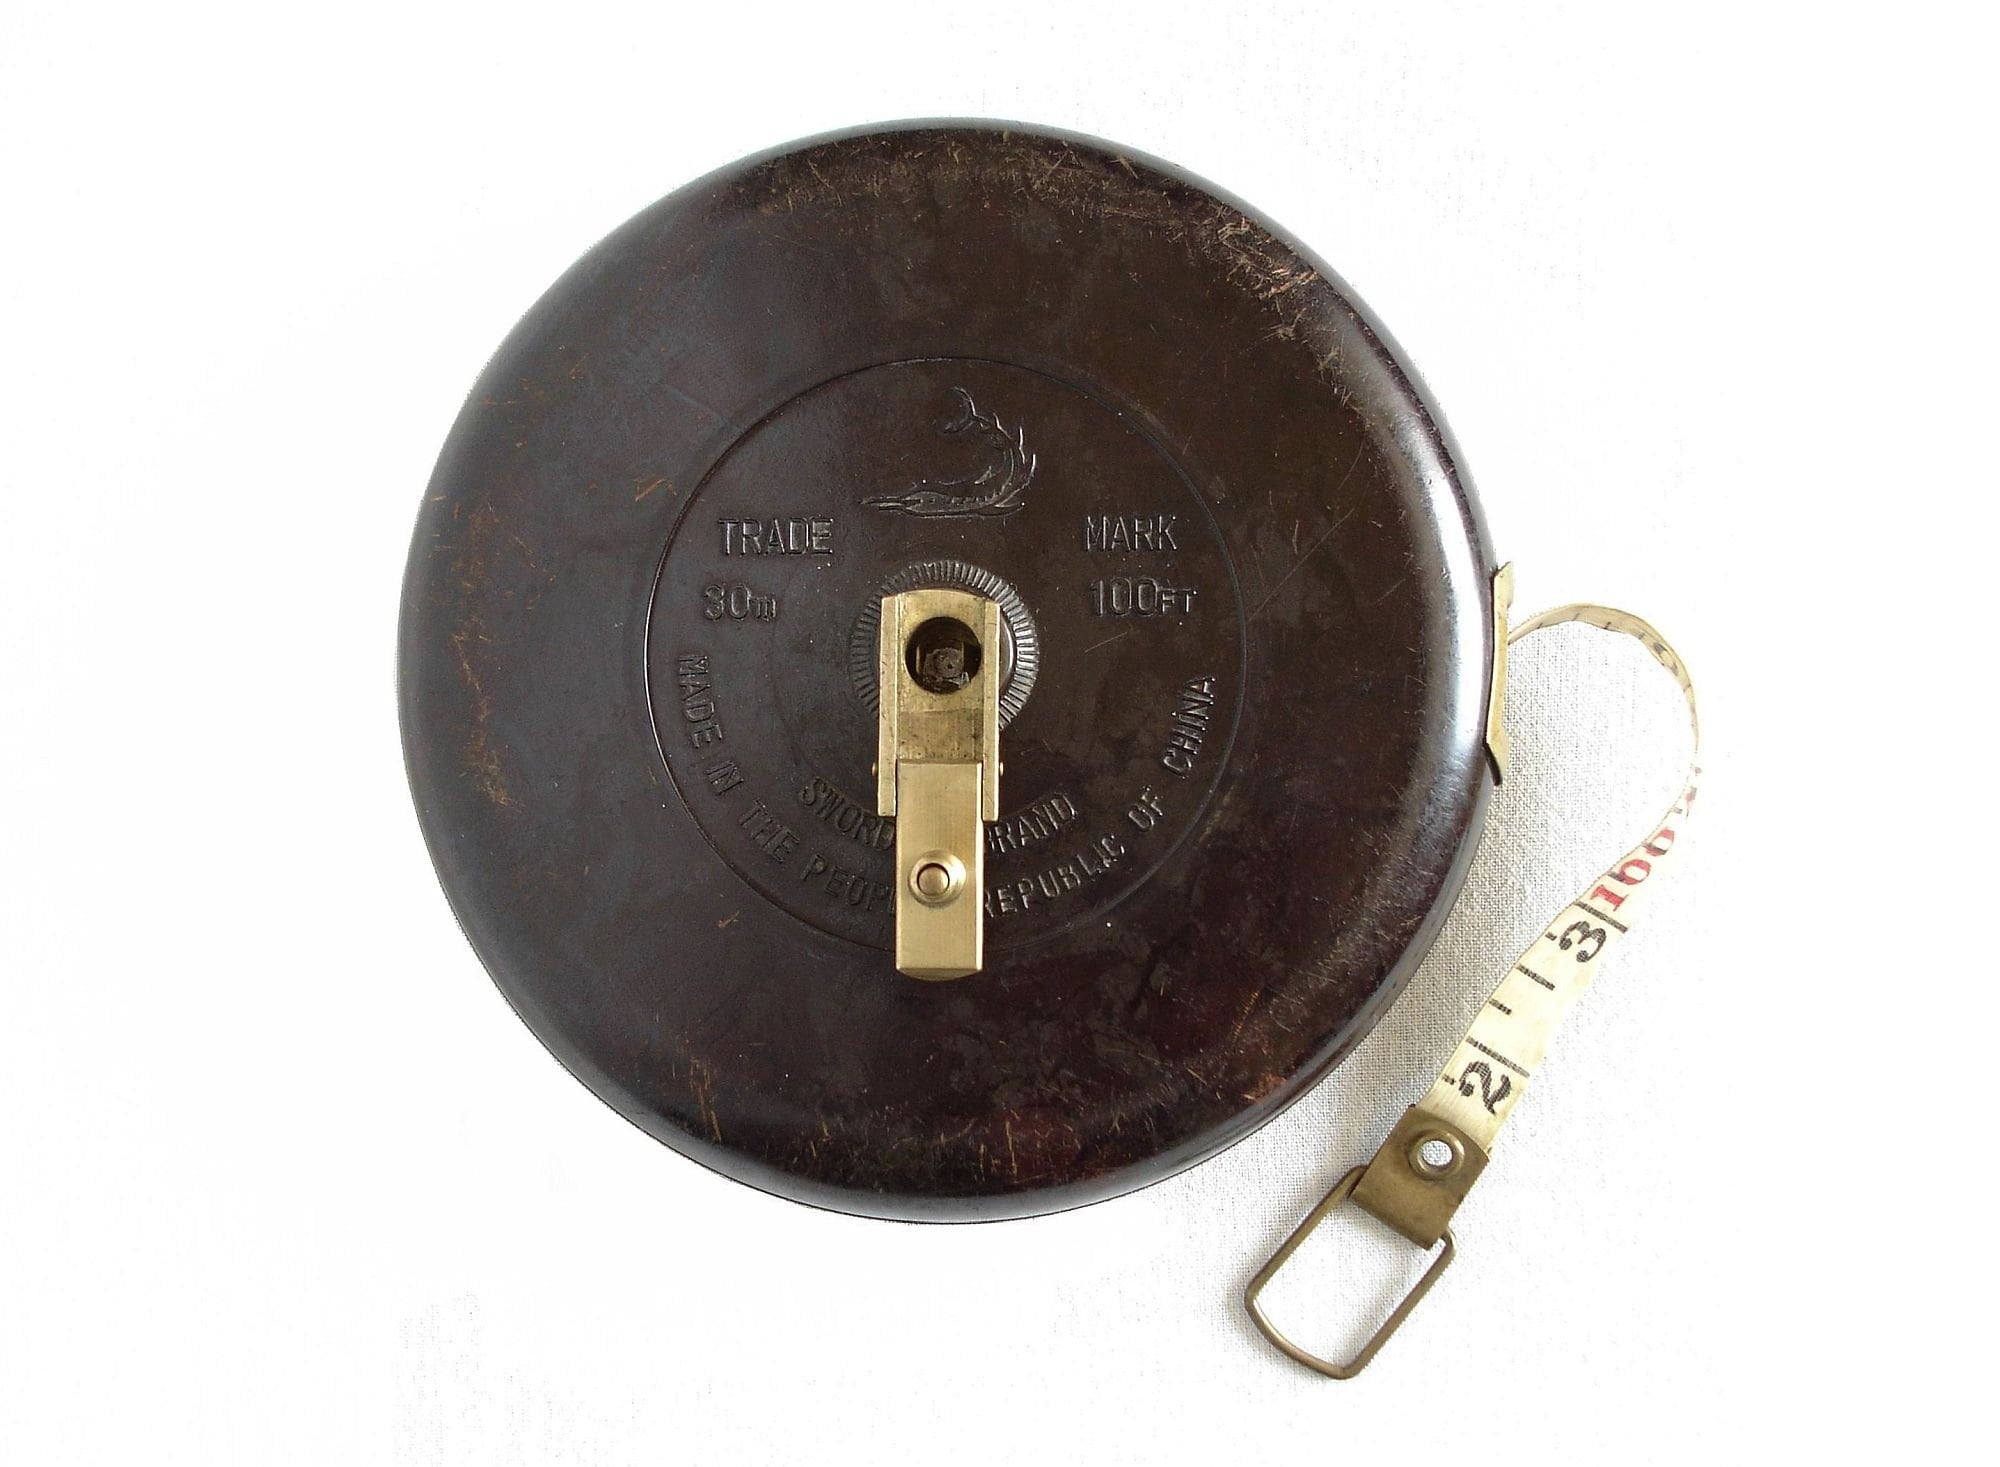 Fabric Measuring Tape in a Bakelite Frame. - Gilai Collectibles